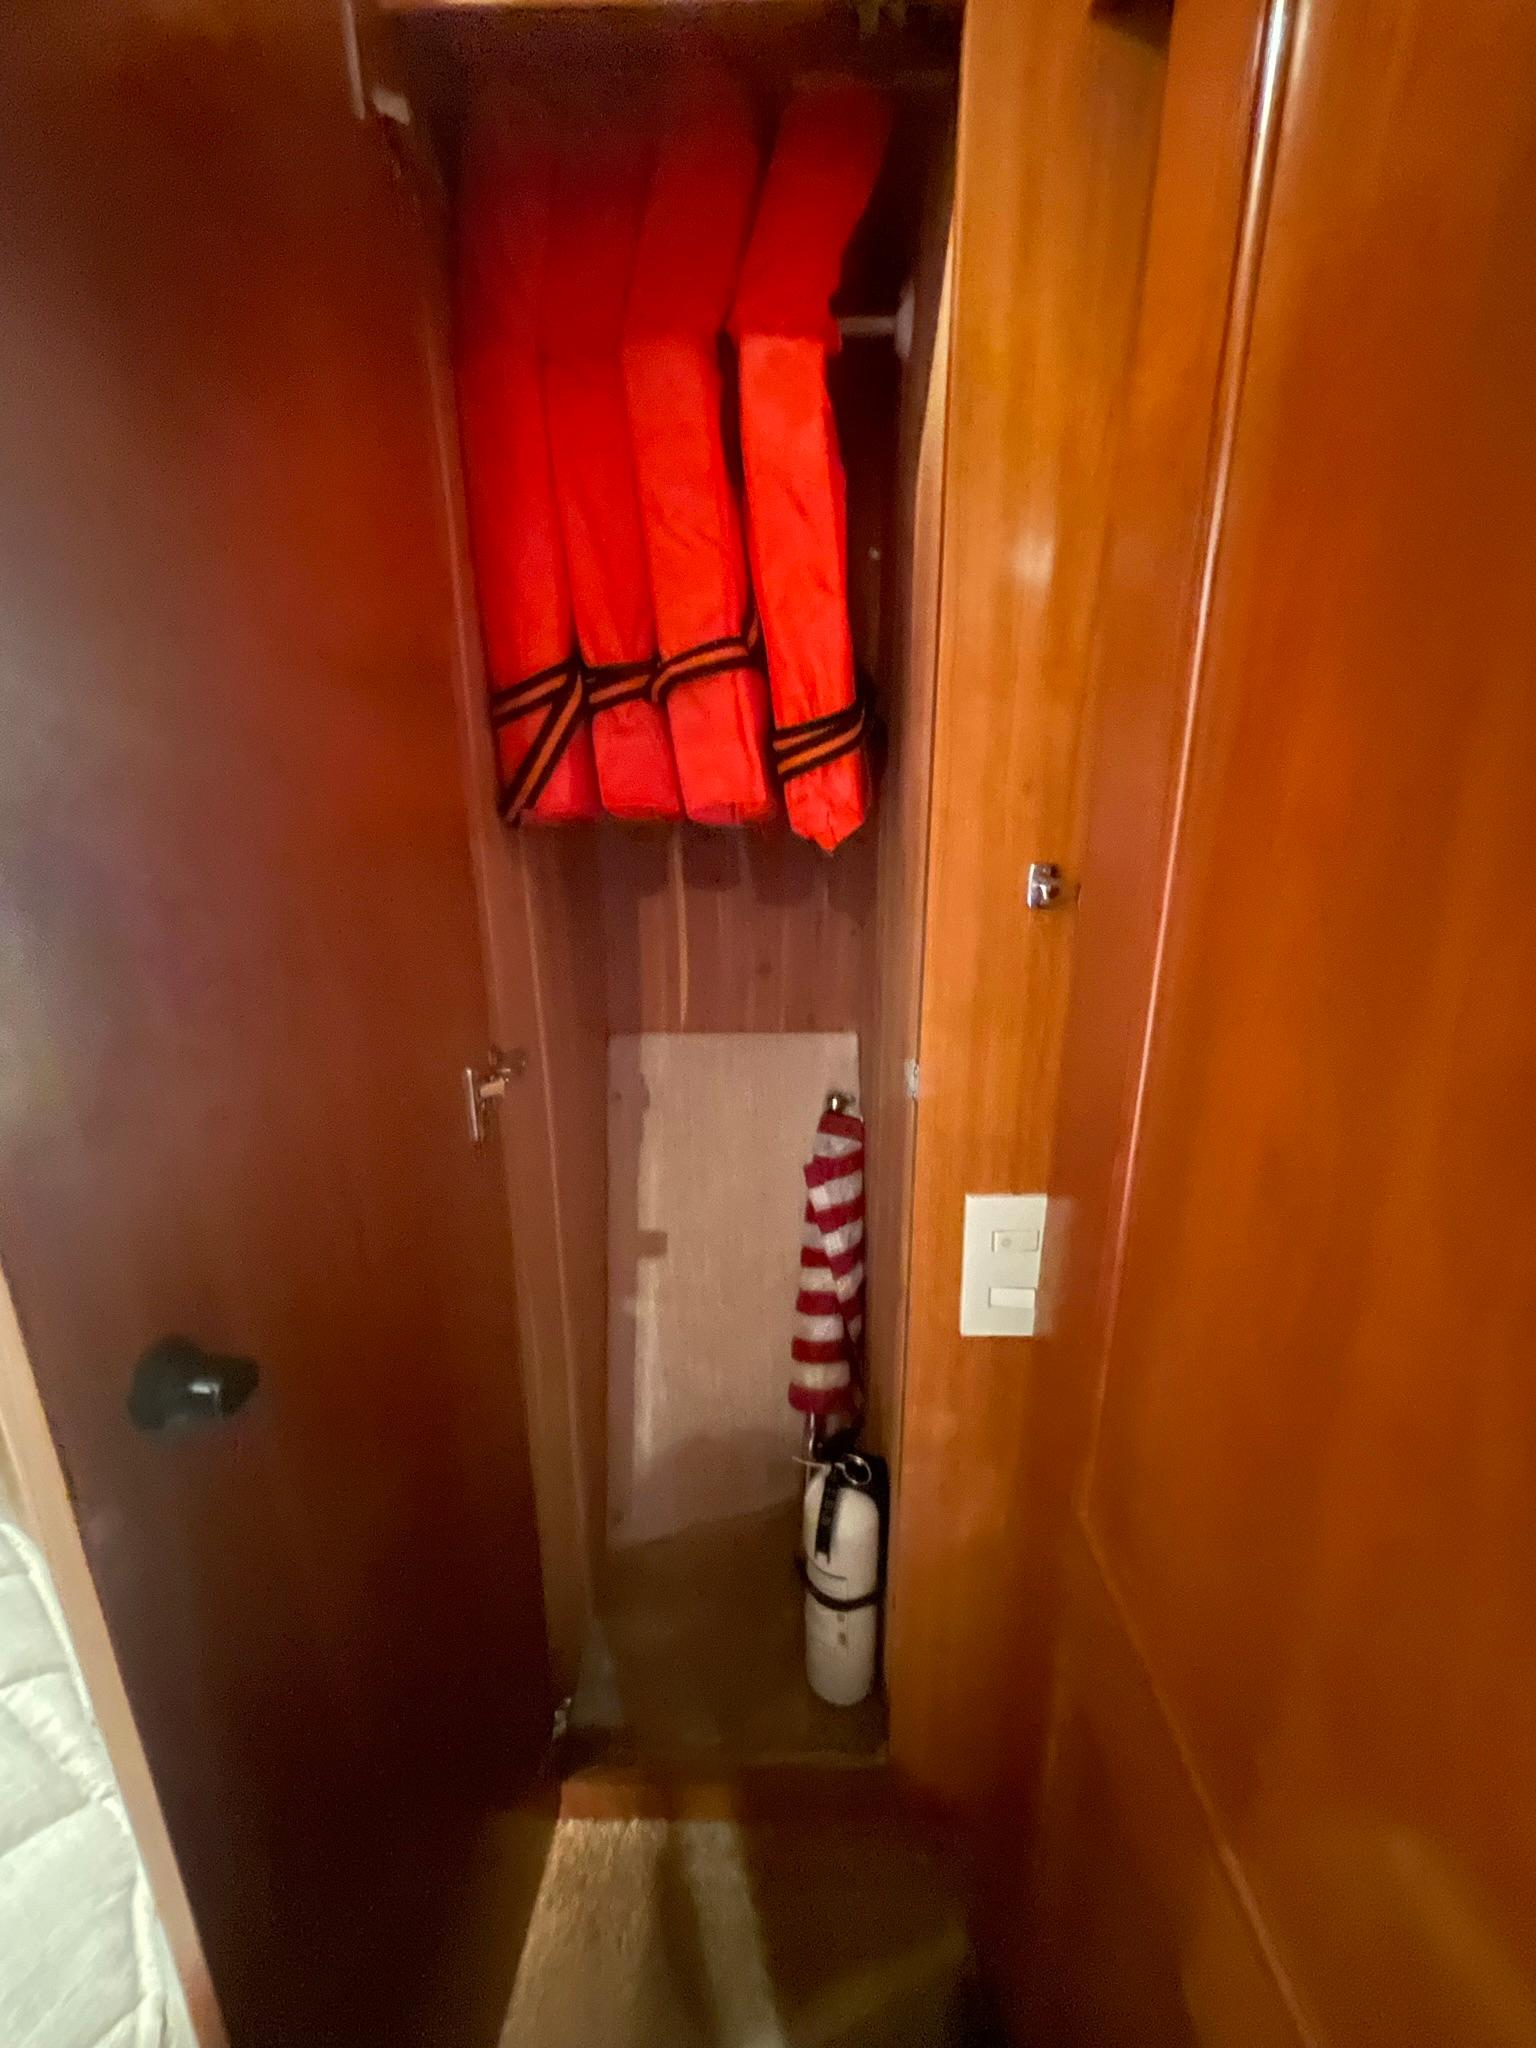 VIP/GUEST STATEROOM CEDAR LINED HANGING CLOSET TO STBD.